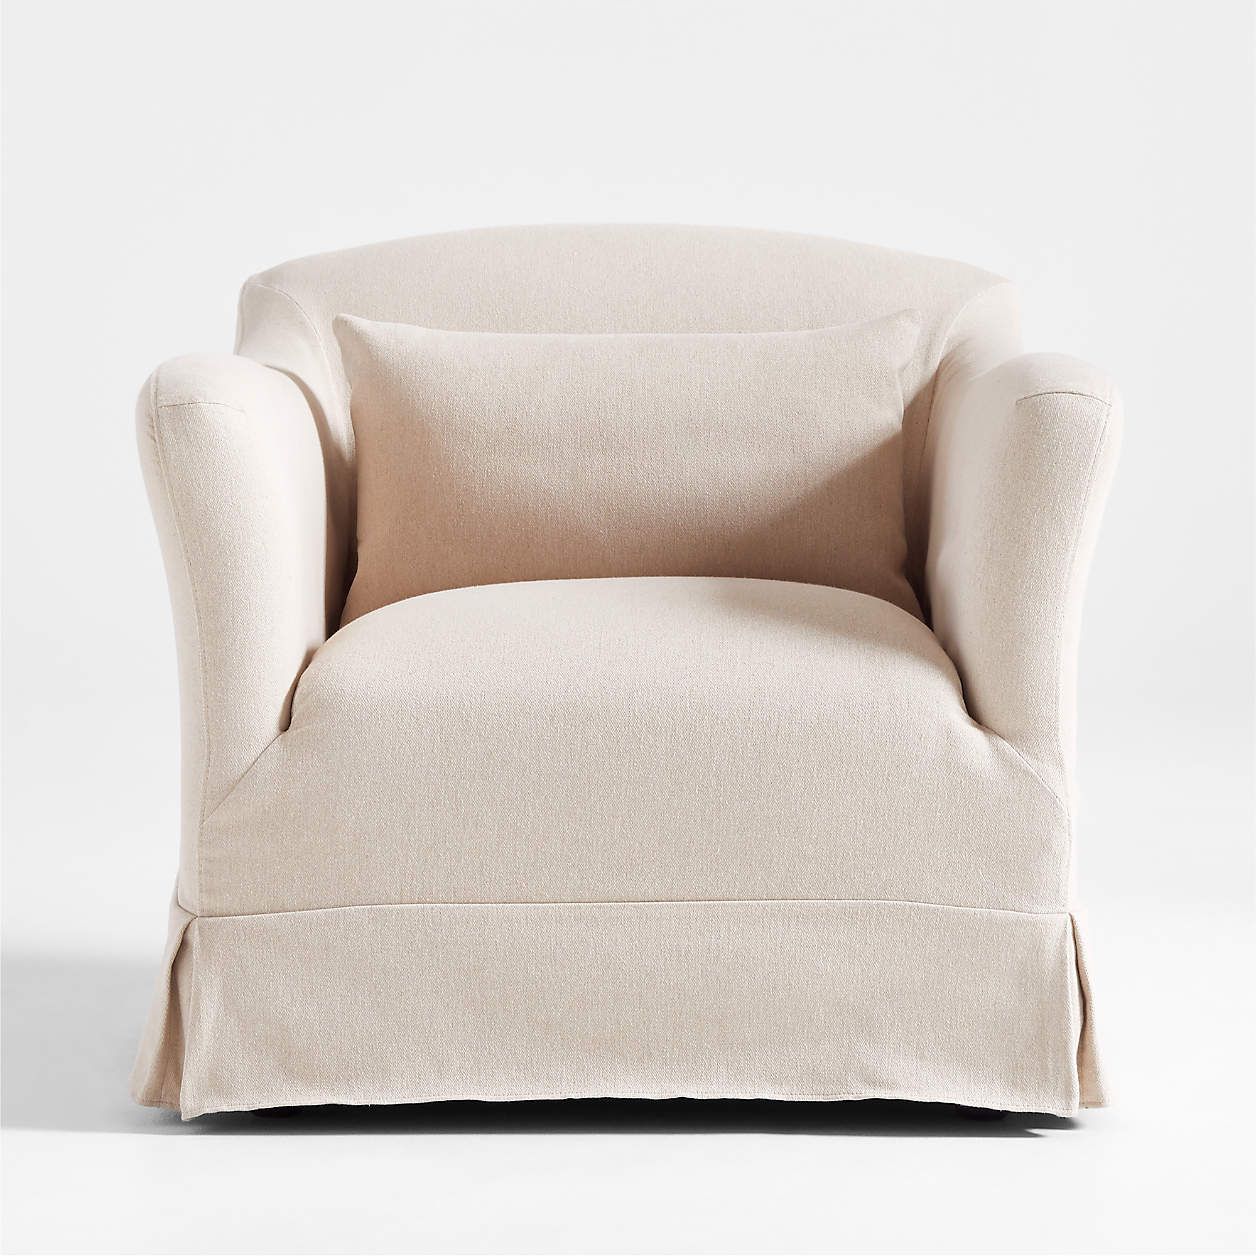 Crawford Slipcovered Chair by Jake Arnold | Crate & Barrel | Crate & Barrel